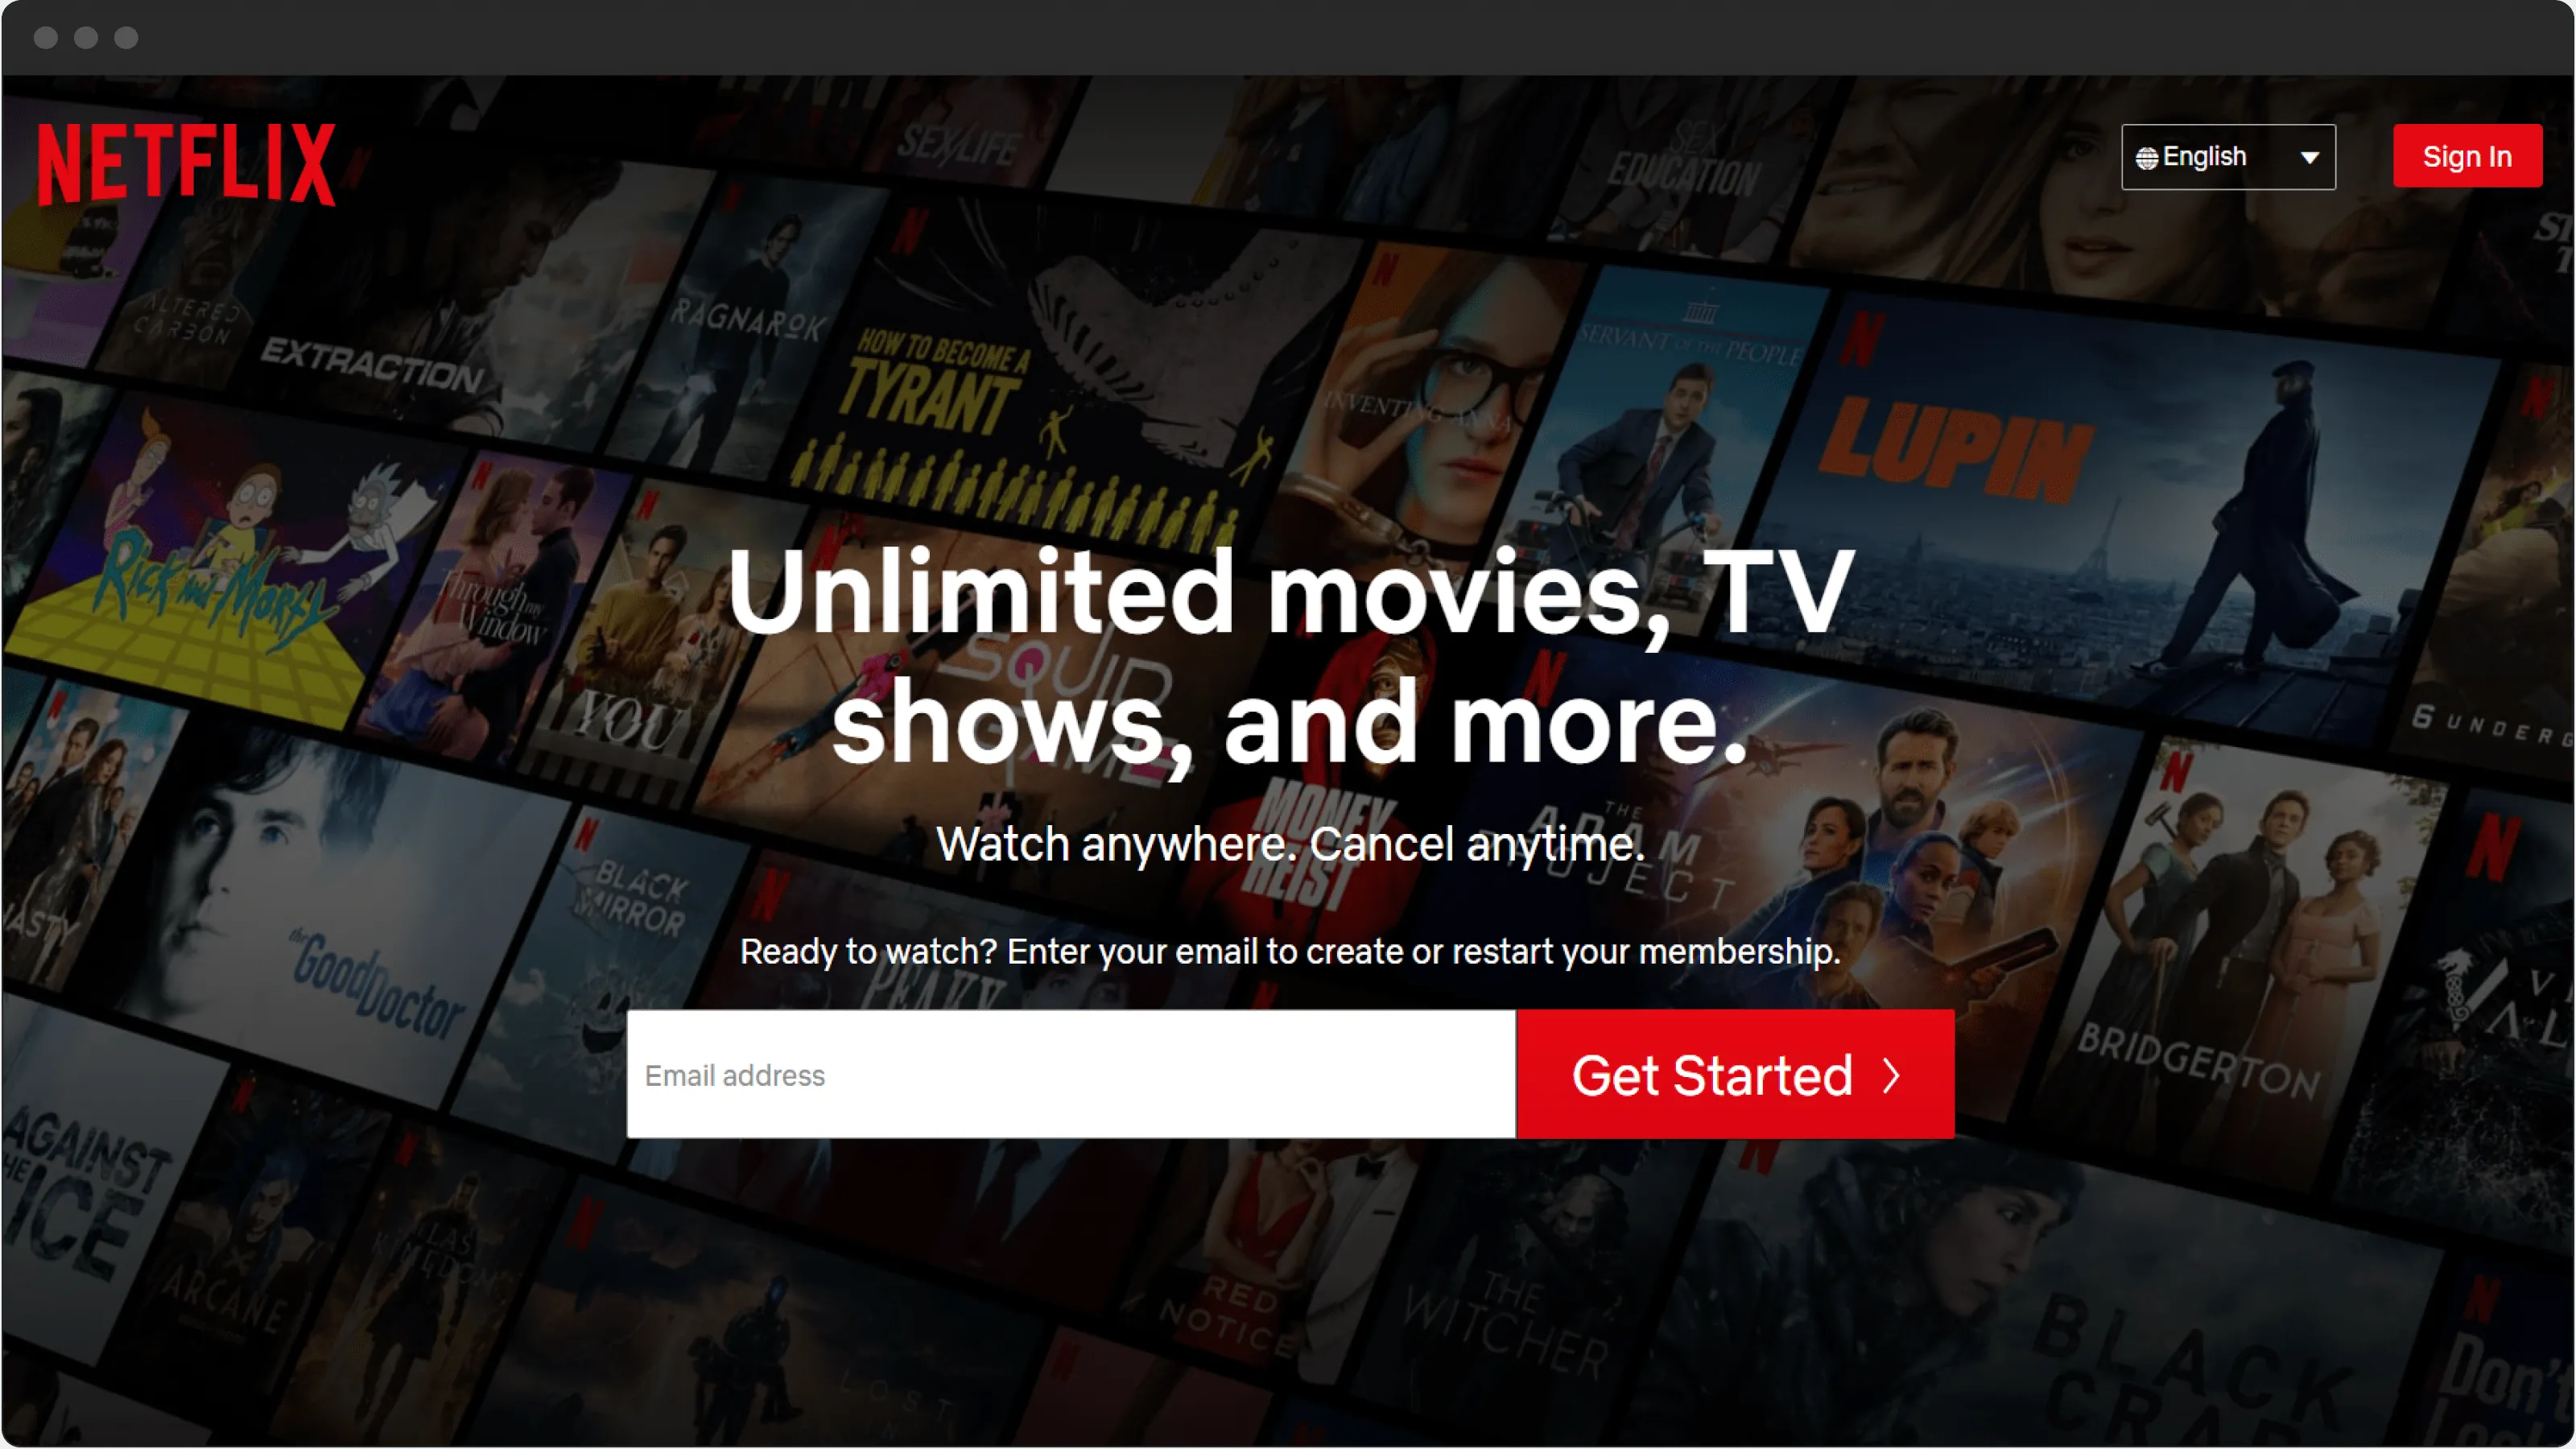 Netflix starting page in the US